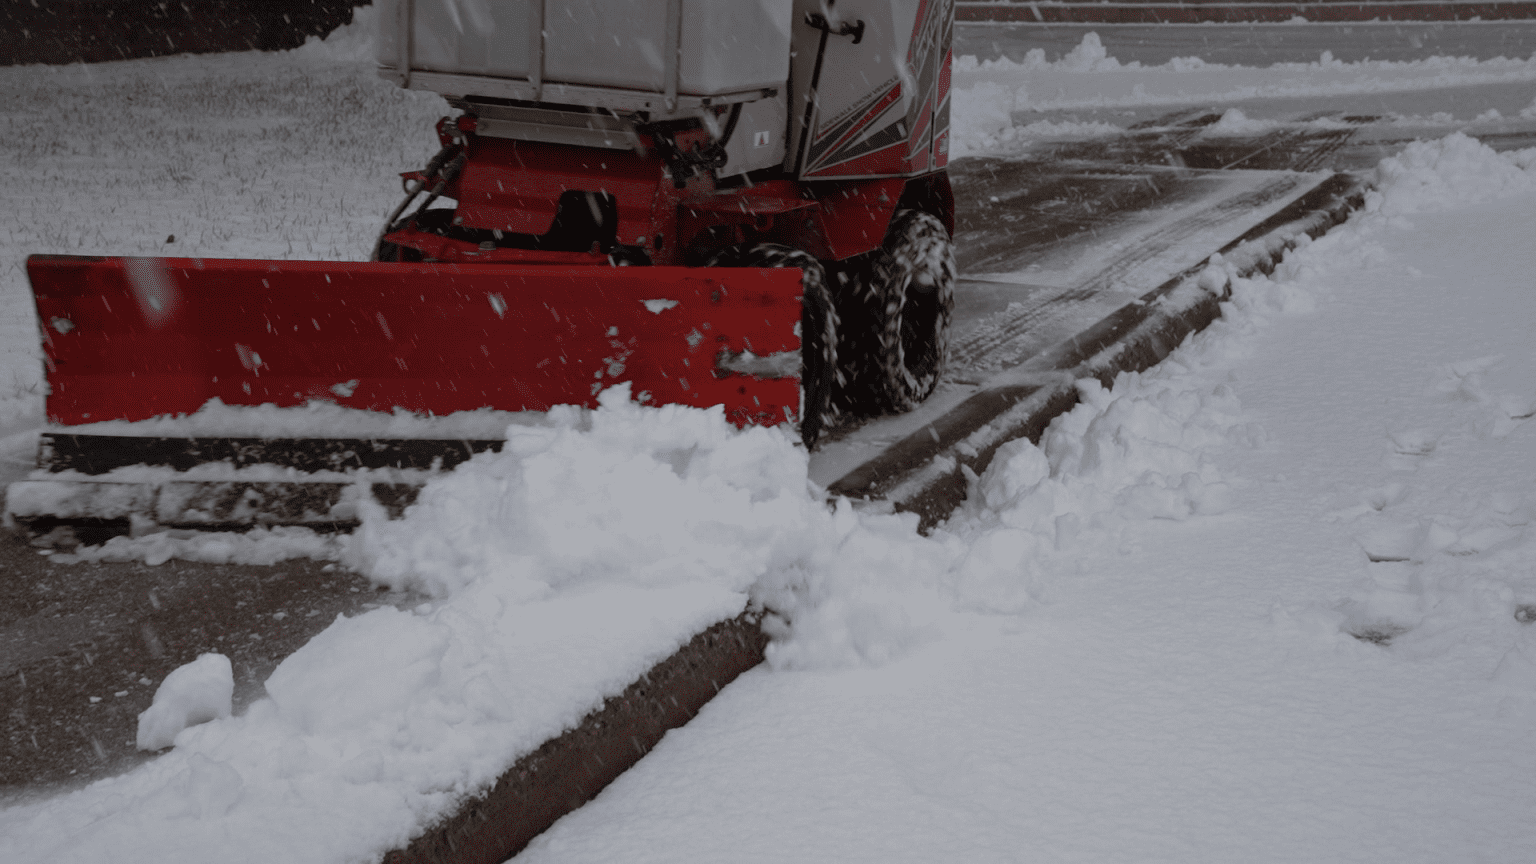 A commercial snow plow is being used to clear snow from a street as part of the snow and ice management process.